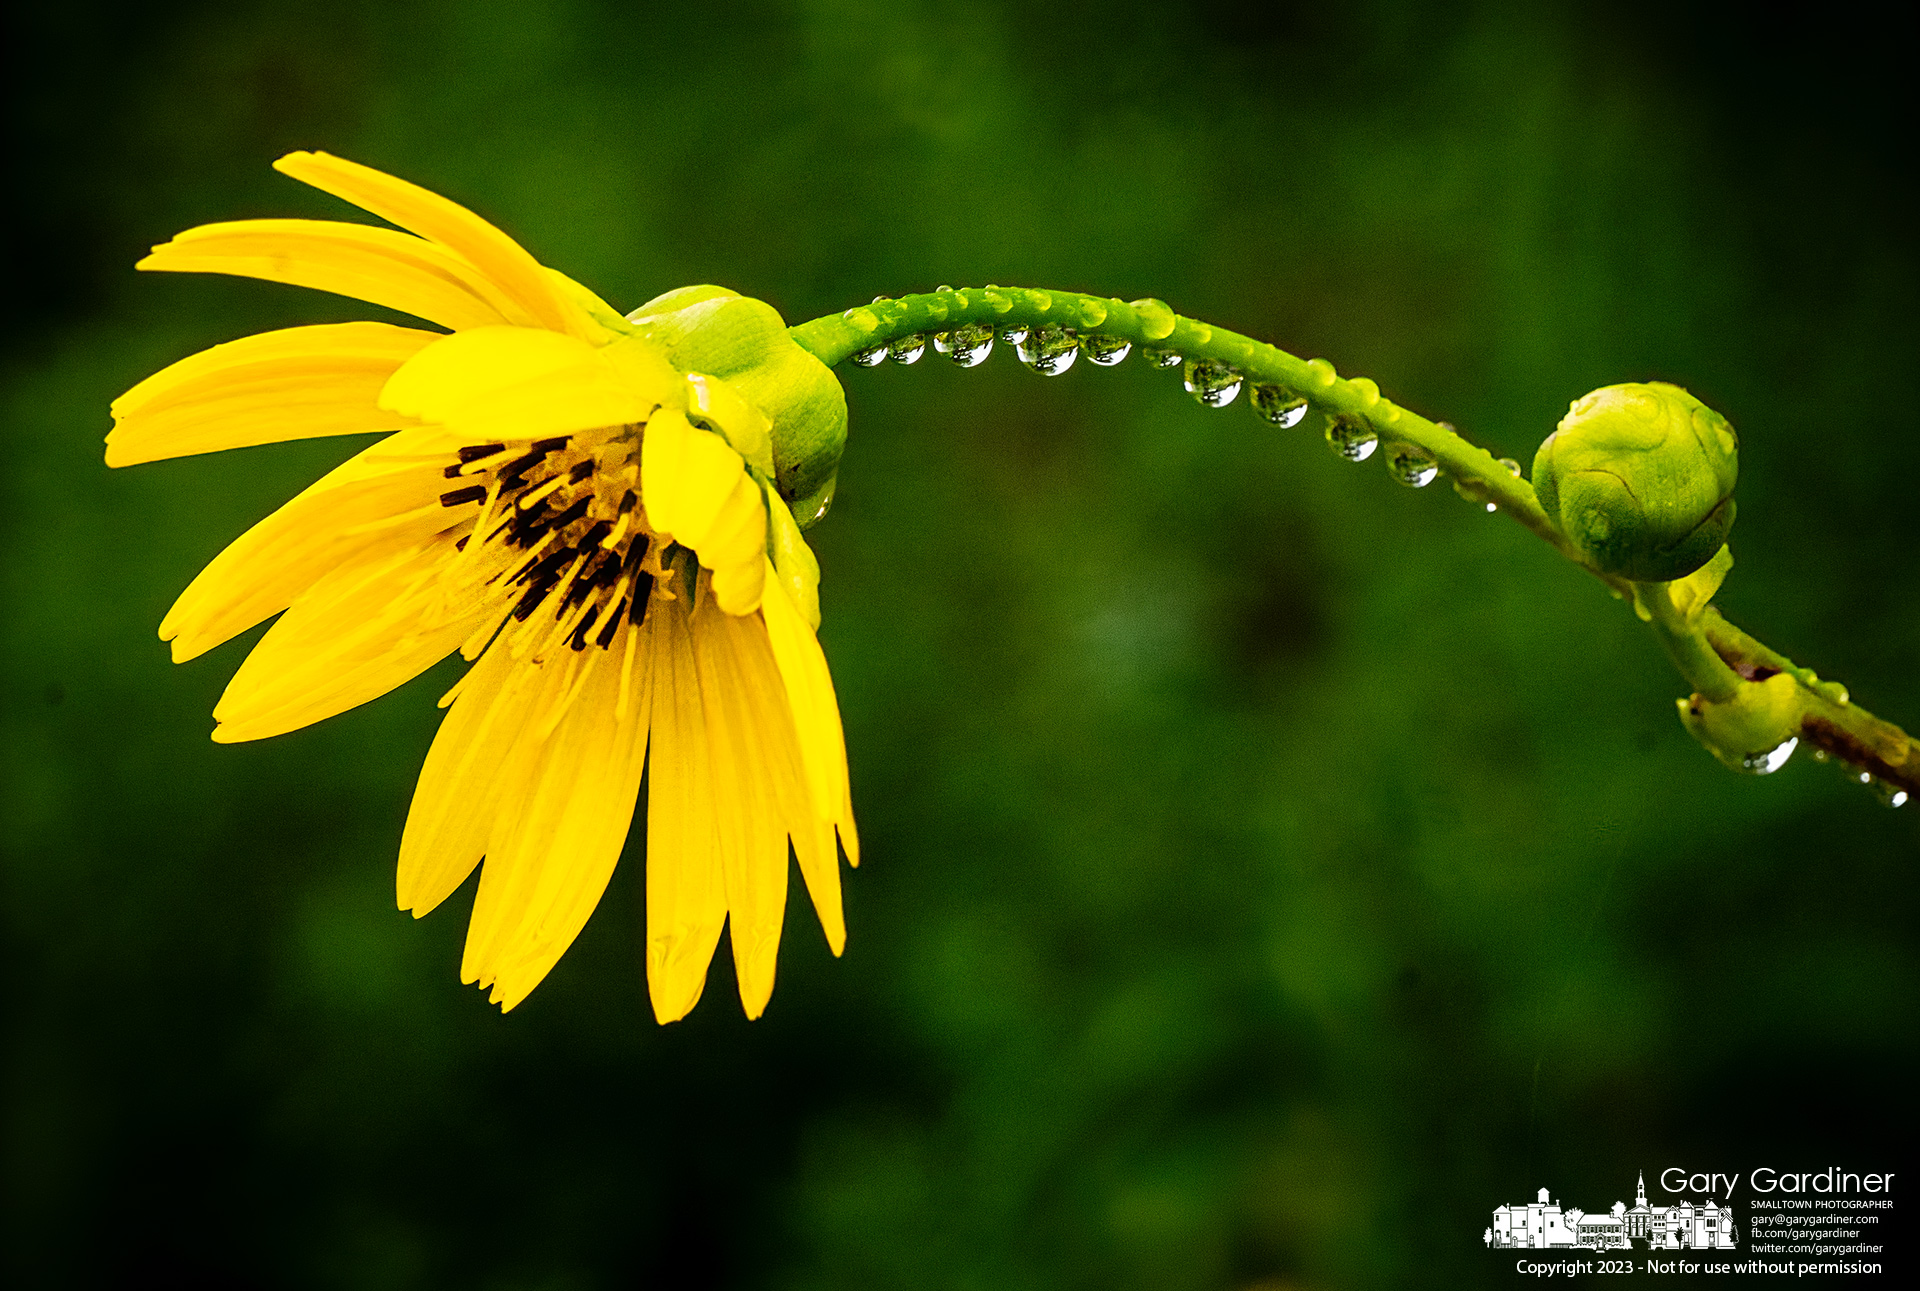 Raindrops hang from the drooping stem of a Prairie Dock wildflower growing across the path at the Highlands Wetlands. My Final Photo for August 14, 2023.